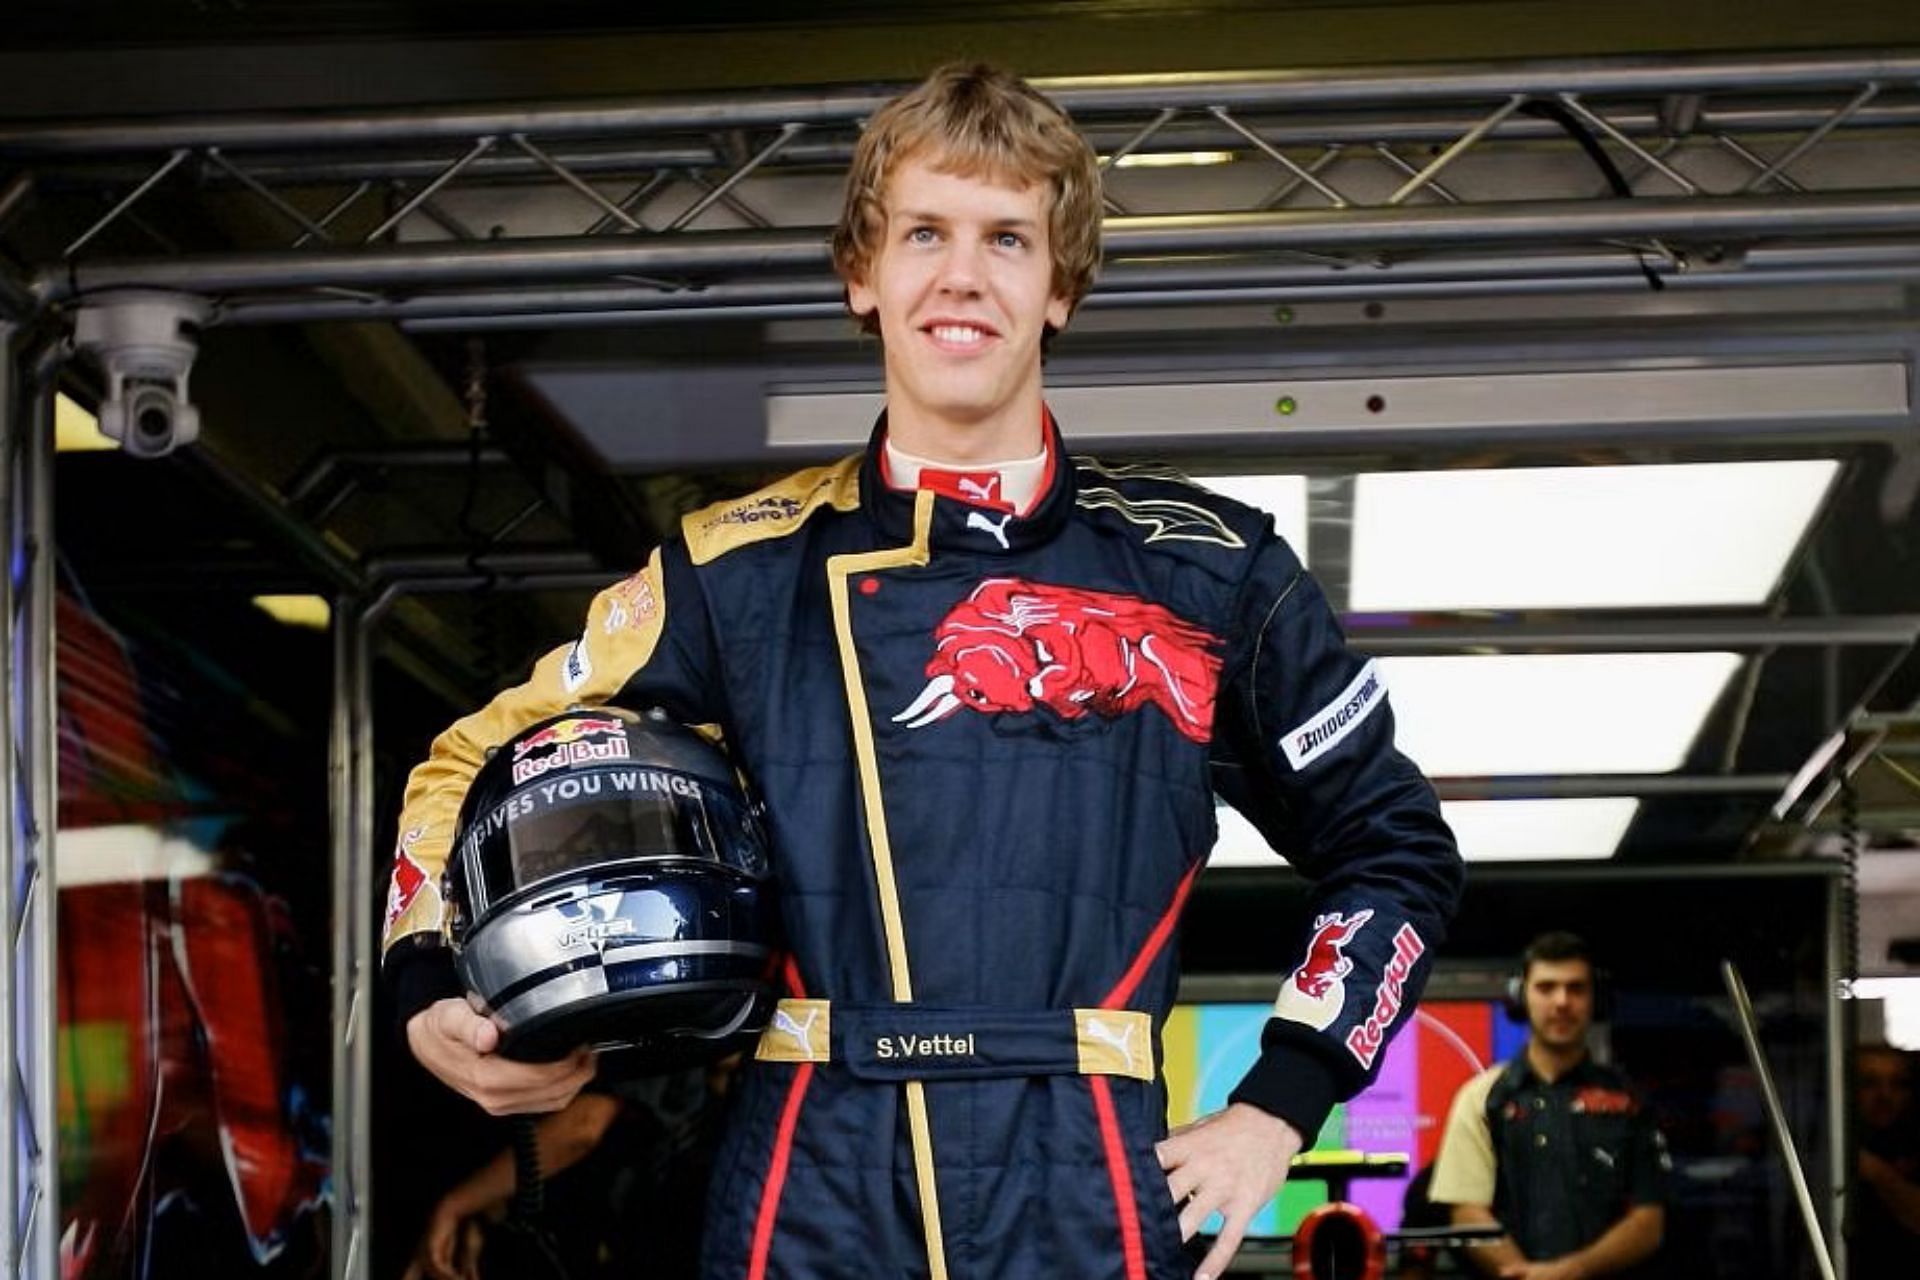 Sebastian Vettel in the pits during the 2007 F1 Hungarian Grand Prix. (Photo by Mark Thompson/Getty Images)